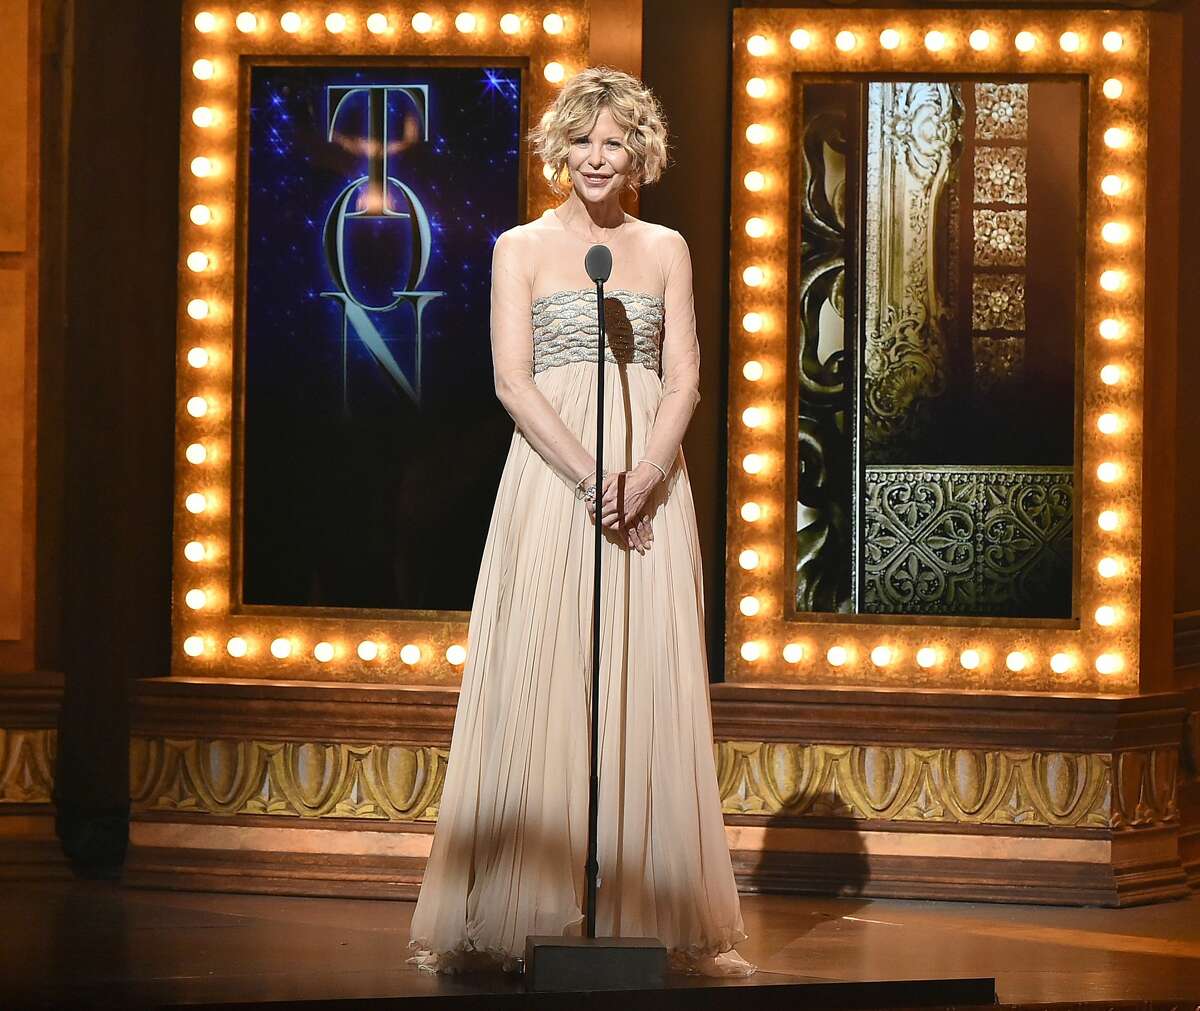 Actress Meg Ryan speaks onstage during the 70th Annual Tony Awards at The Beacon Theatre on June 12, 2016 in New York City.